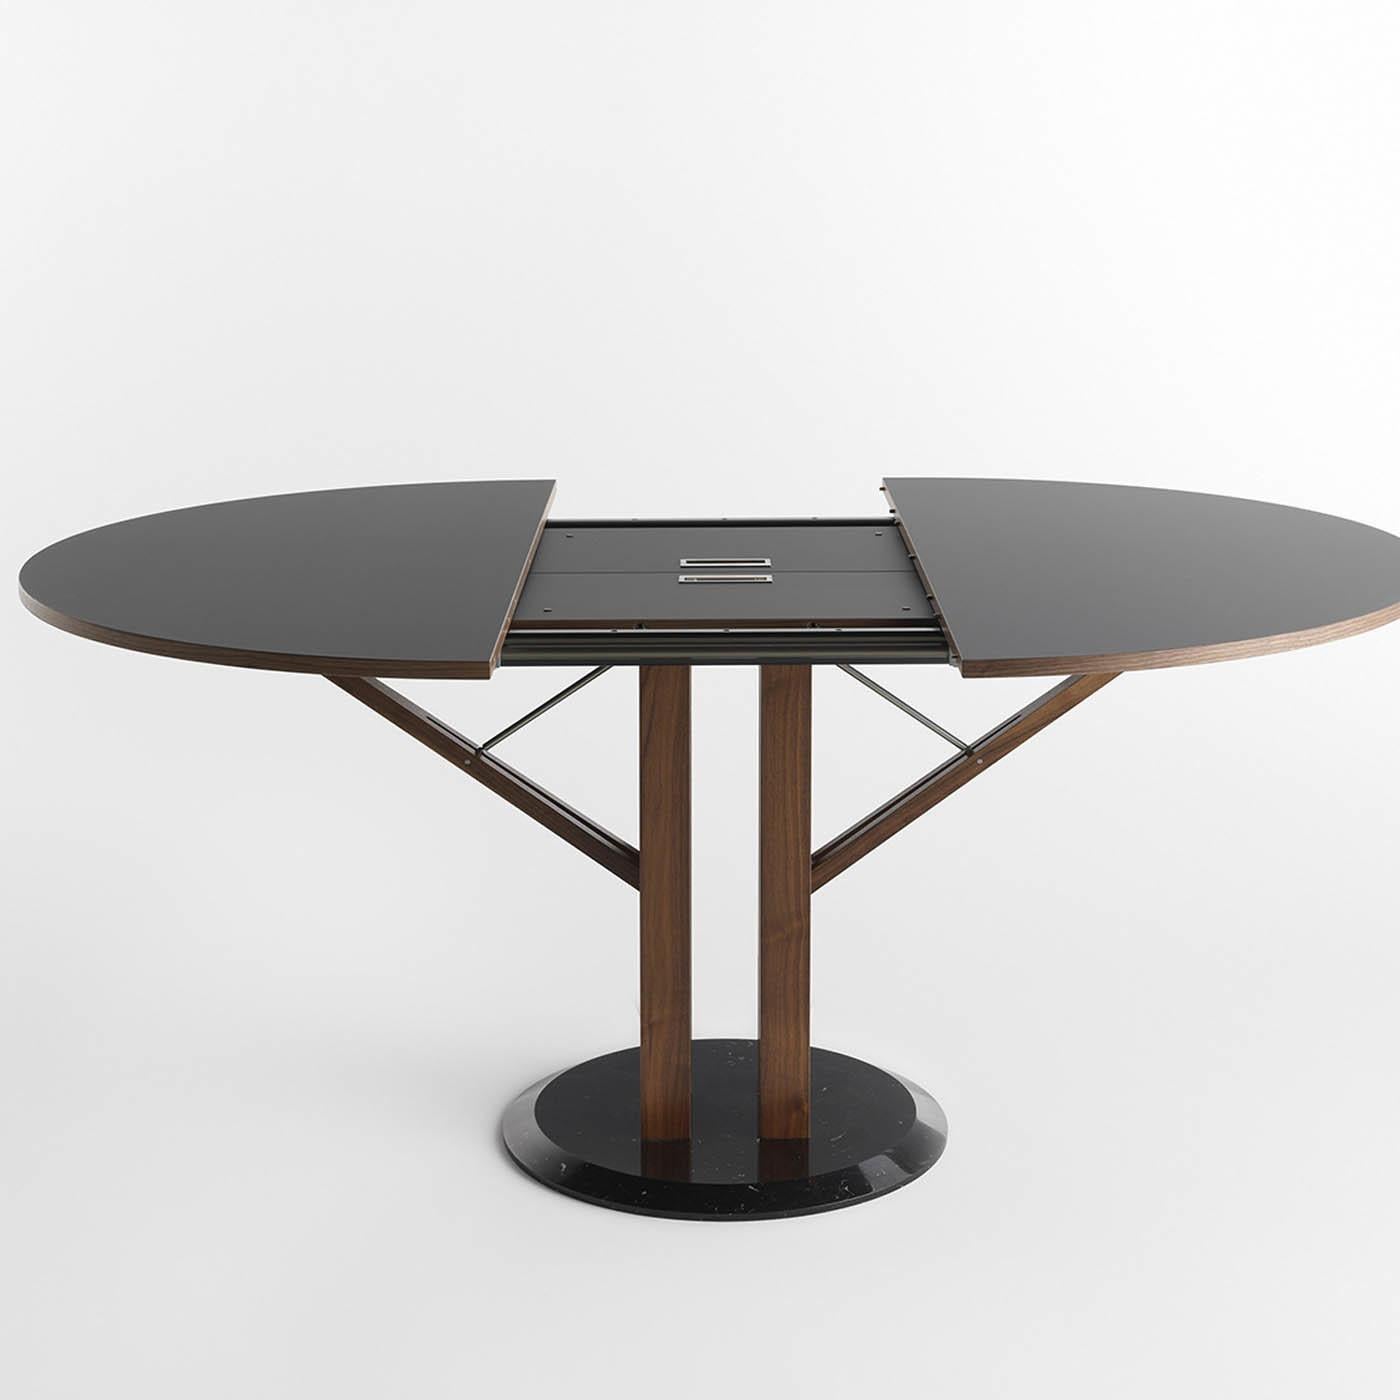 This superb and extremely modern table is a functional piece of design that can extend to a maximum total measure of 178 x 120 x H 75 cm. It features a top and extensions made of Fenix NTM, a new material whose surface features a low-reflective